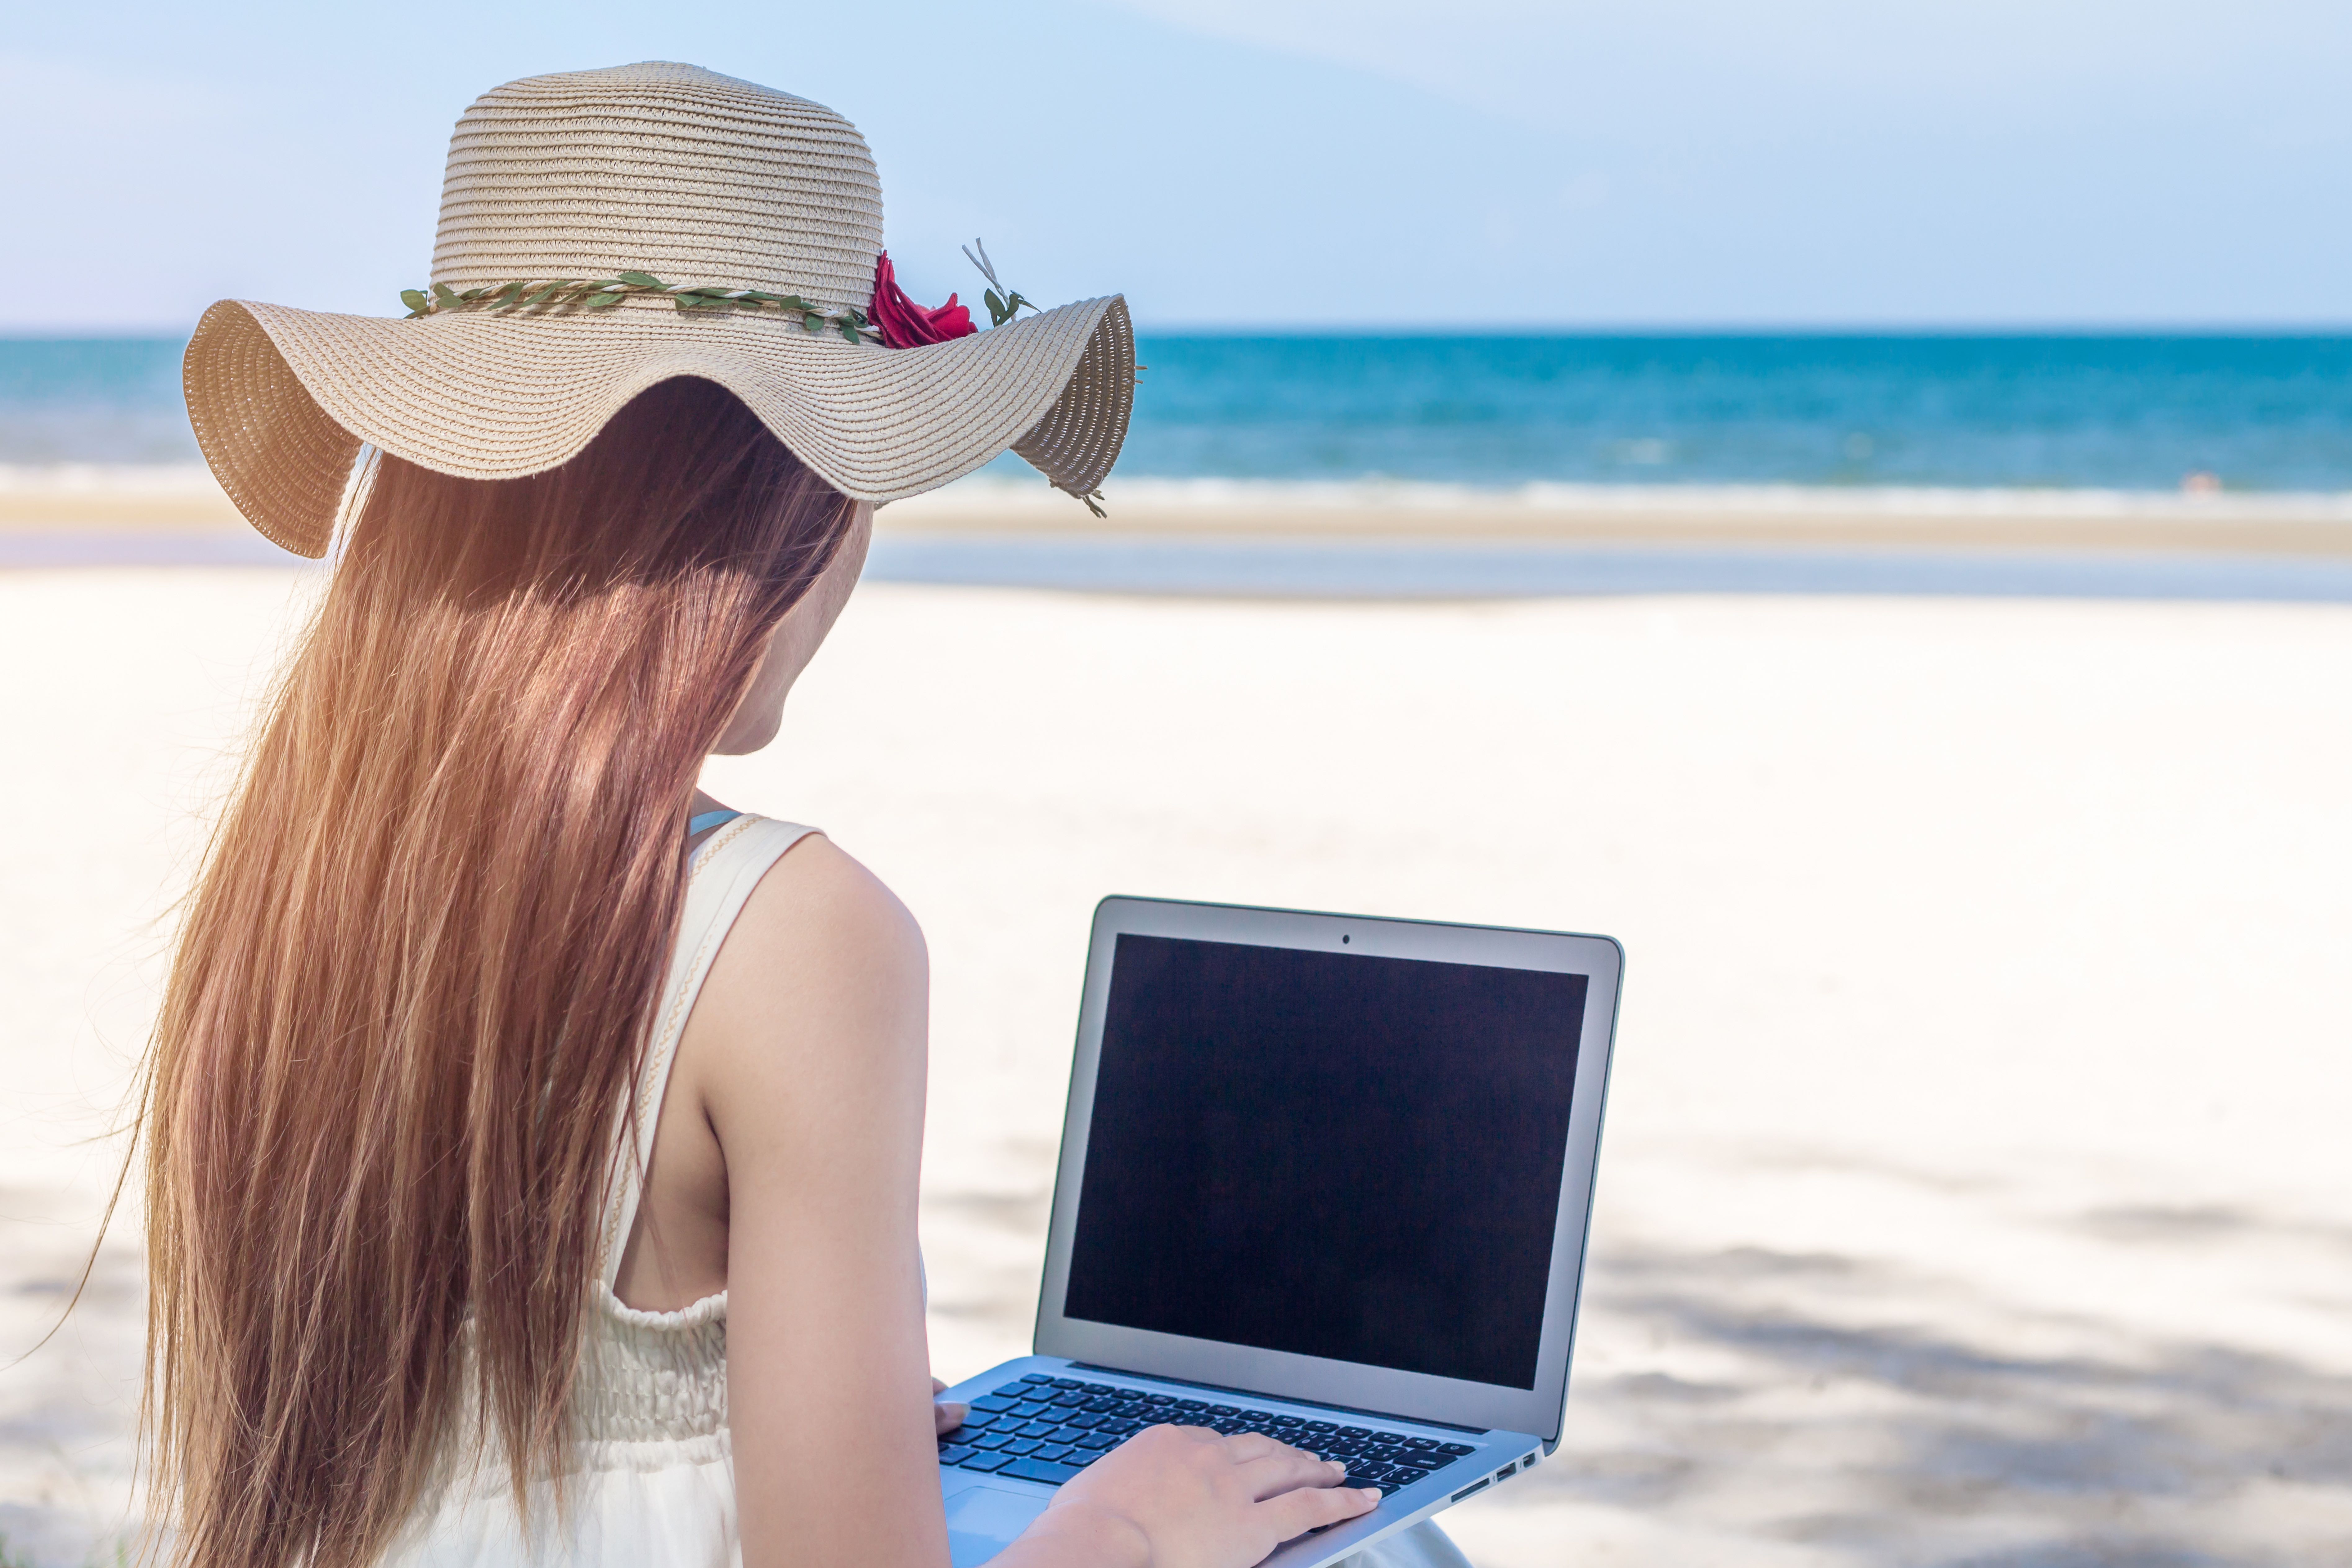 Remote work may not always be a day at the beach, but it's growing in popularity